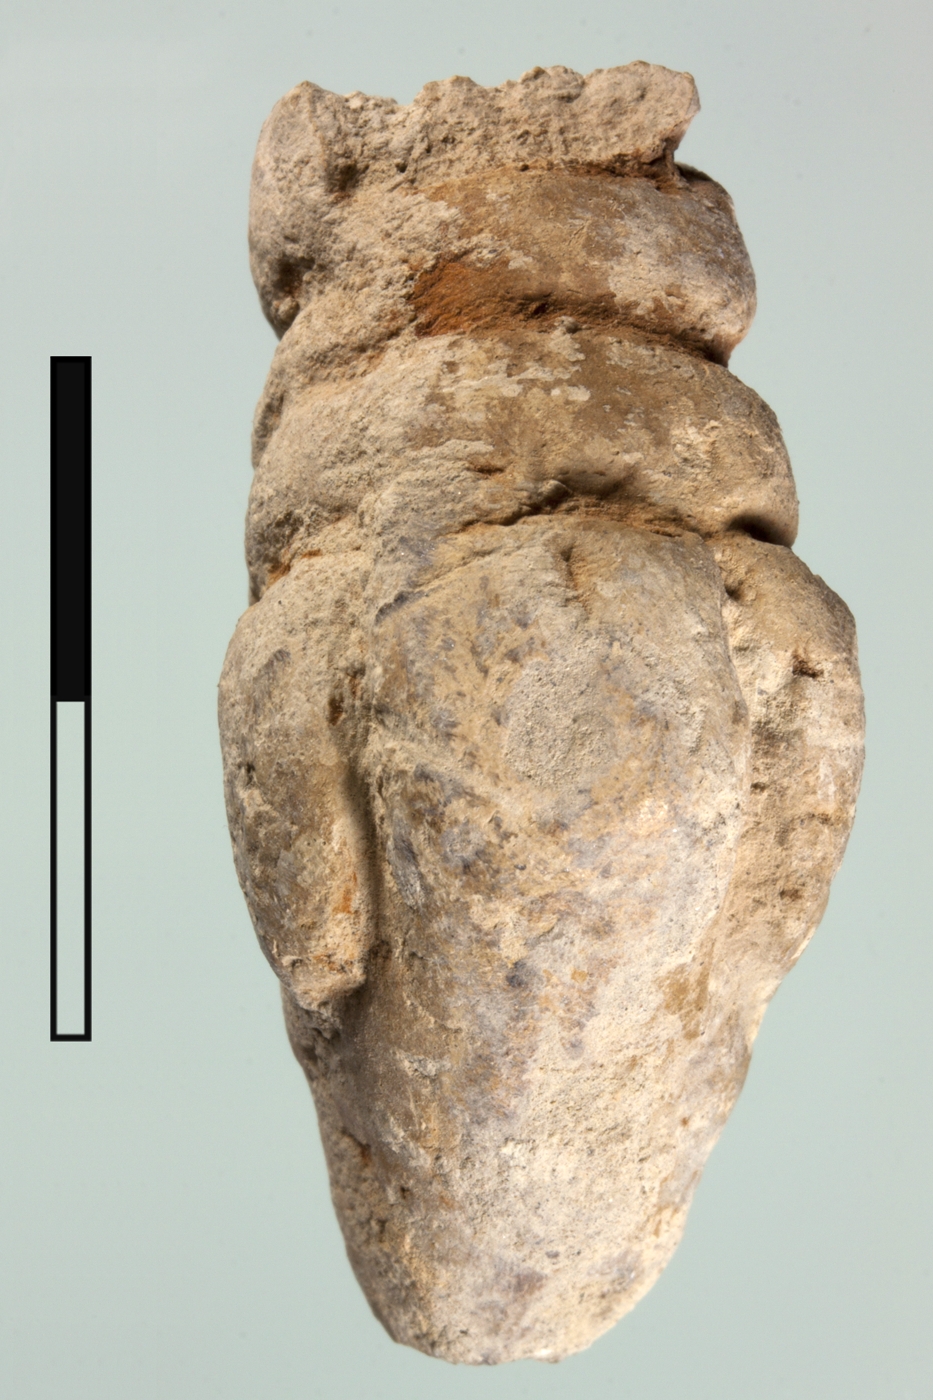 Stylized anthropomorphic clay figurine from a pit in Unit H that post-dates the Meana Horizon.